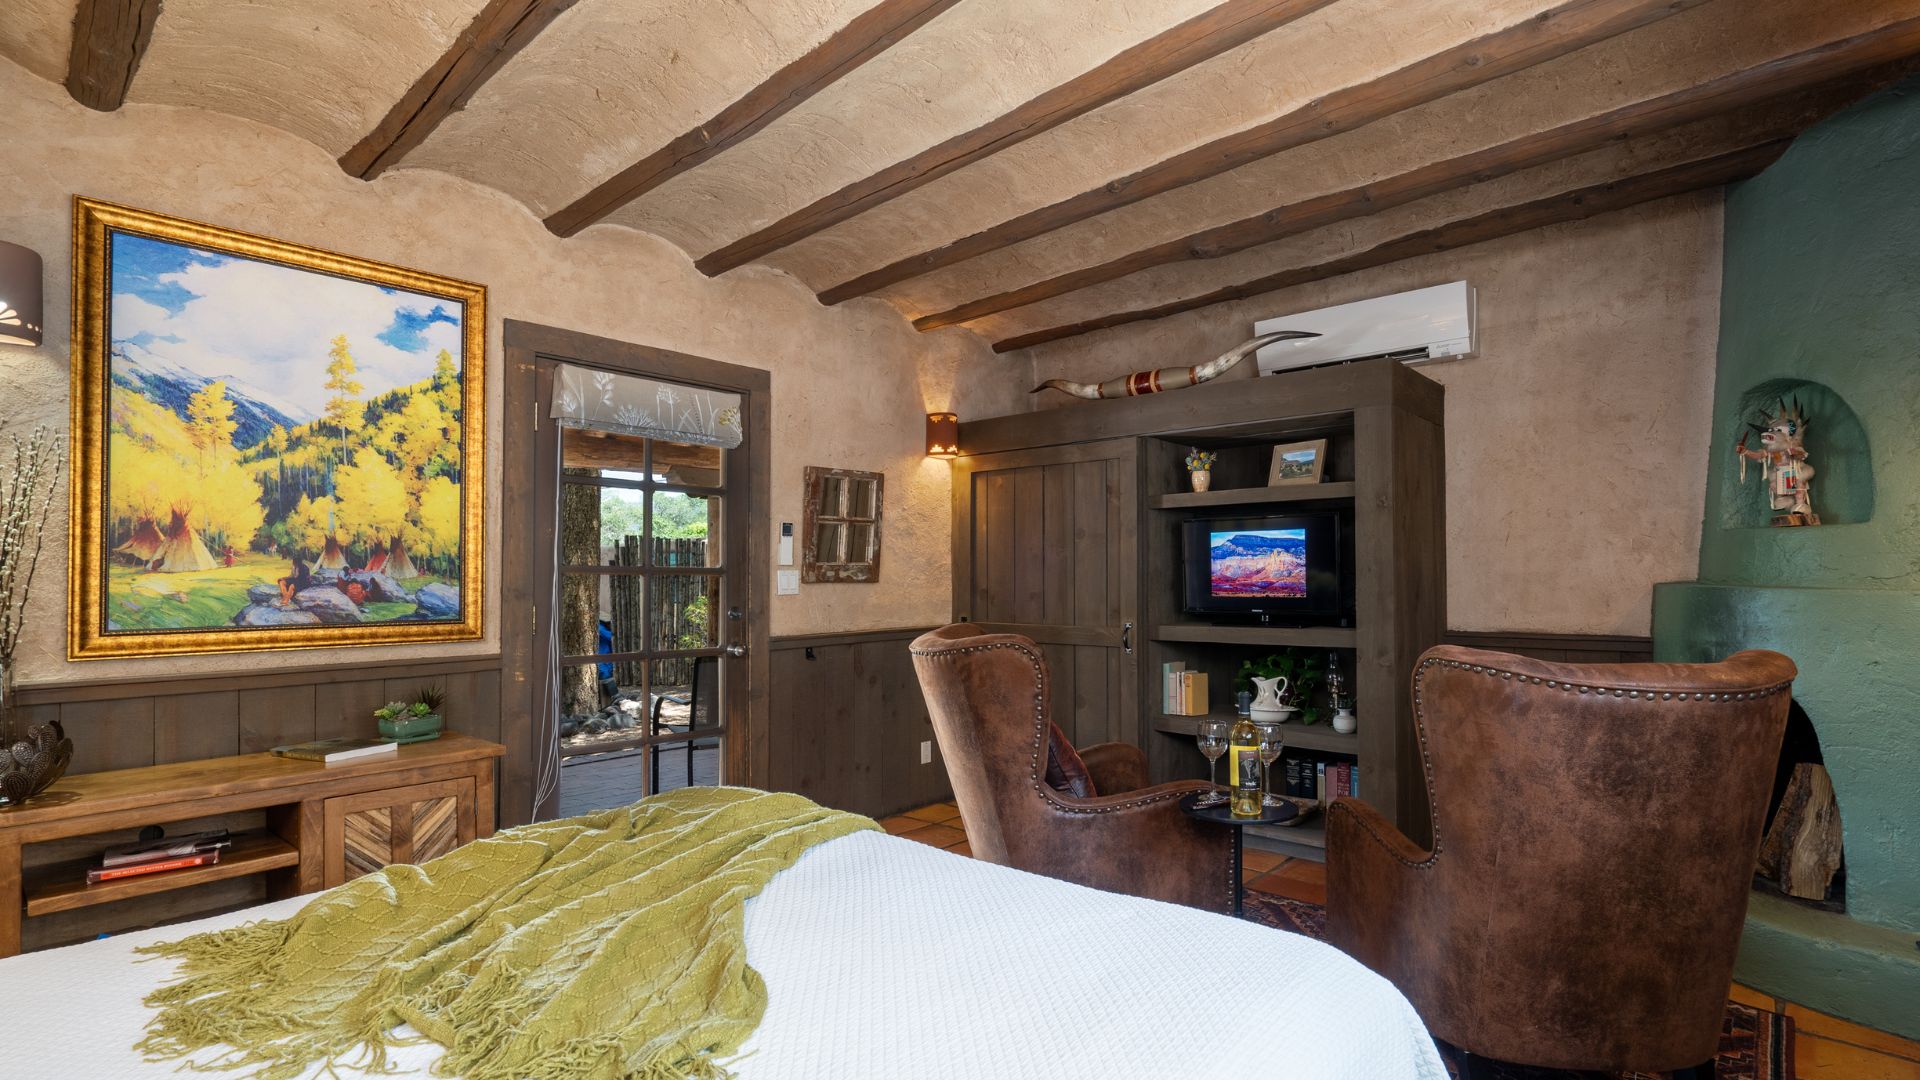 Will Cather guest room with wood ceiling beams, 2 leather chairs, French door to outside, and cozy bed